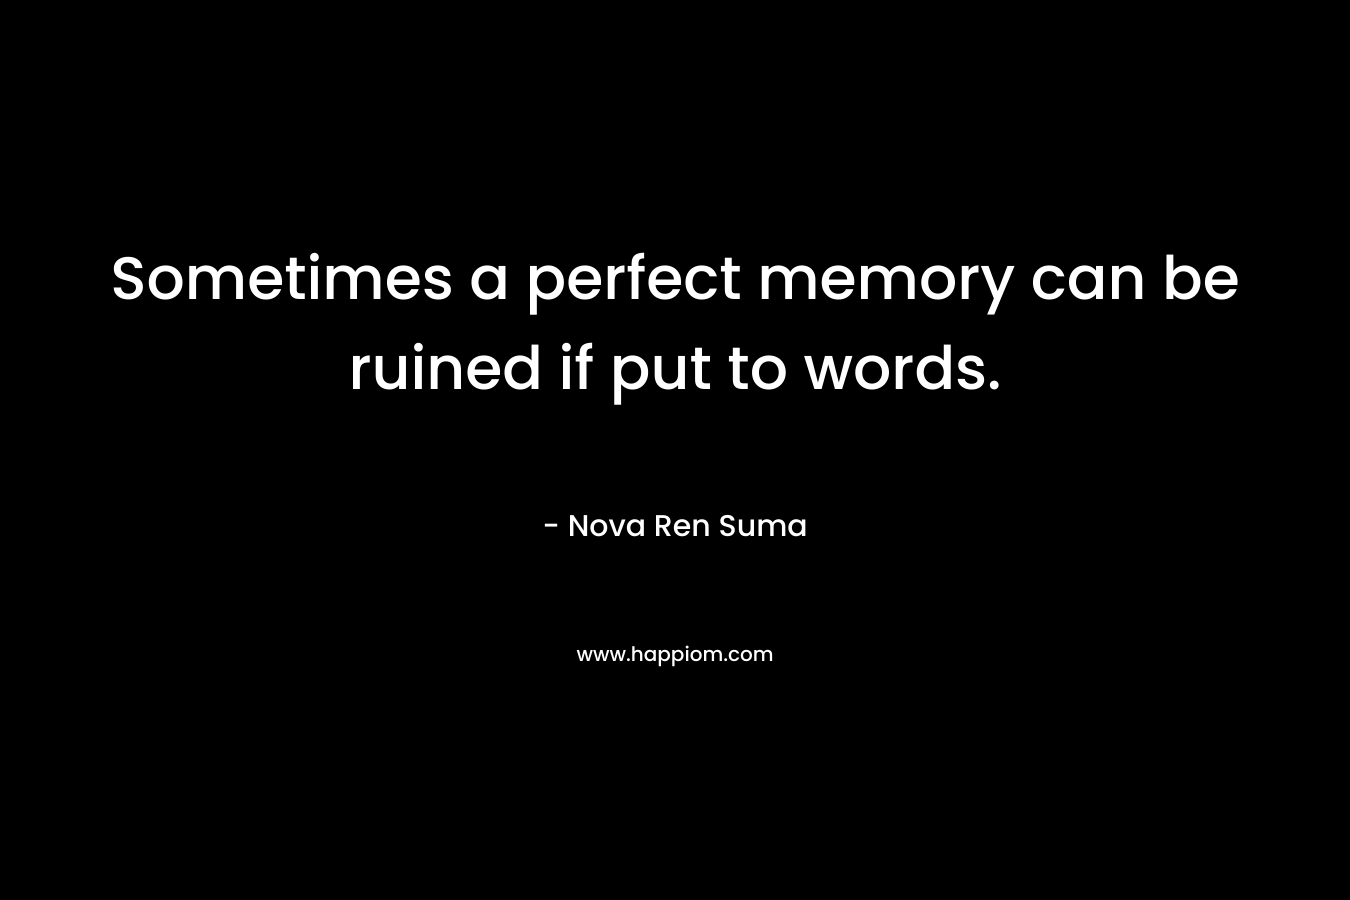 Sometimes a perfect memory can be ruined if put to words. – Nova Ren Suma